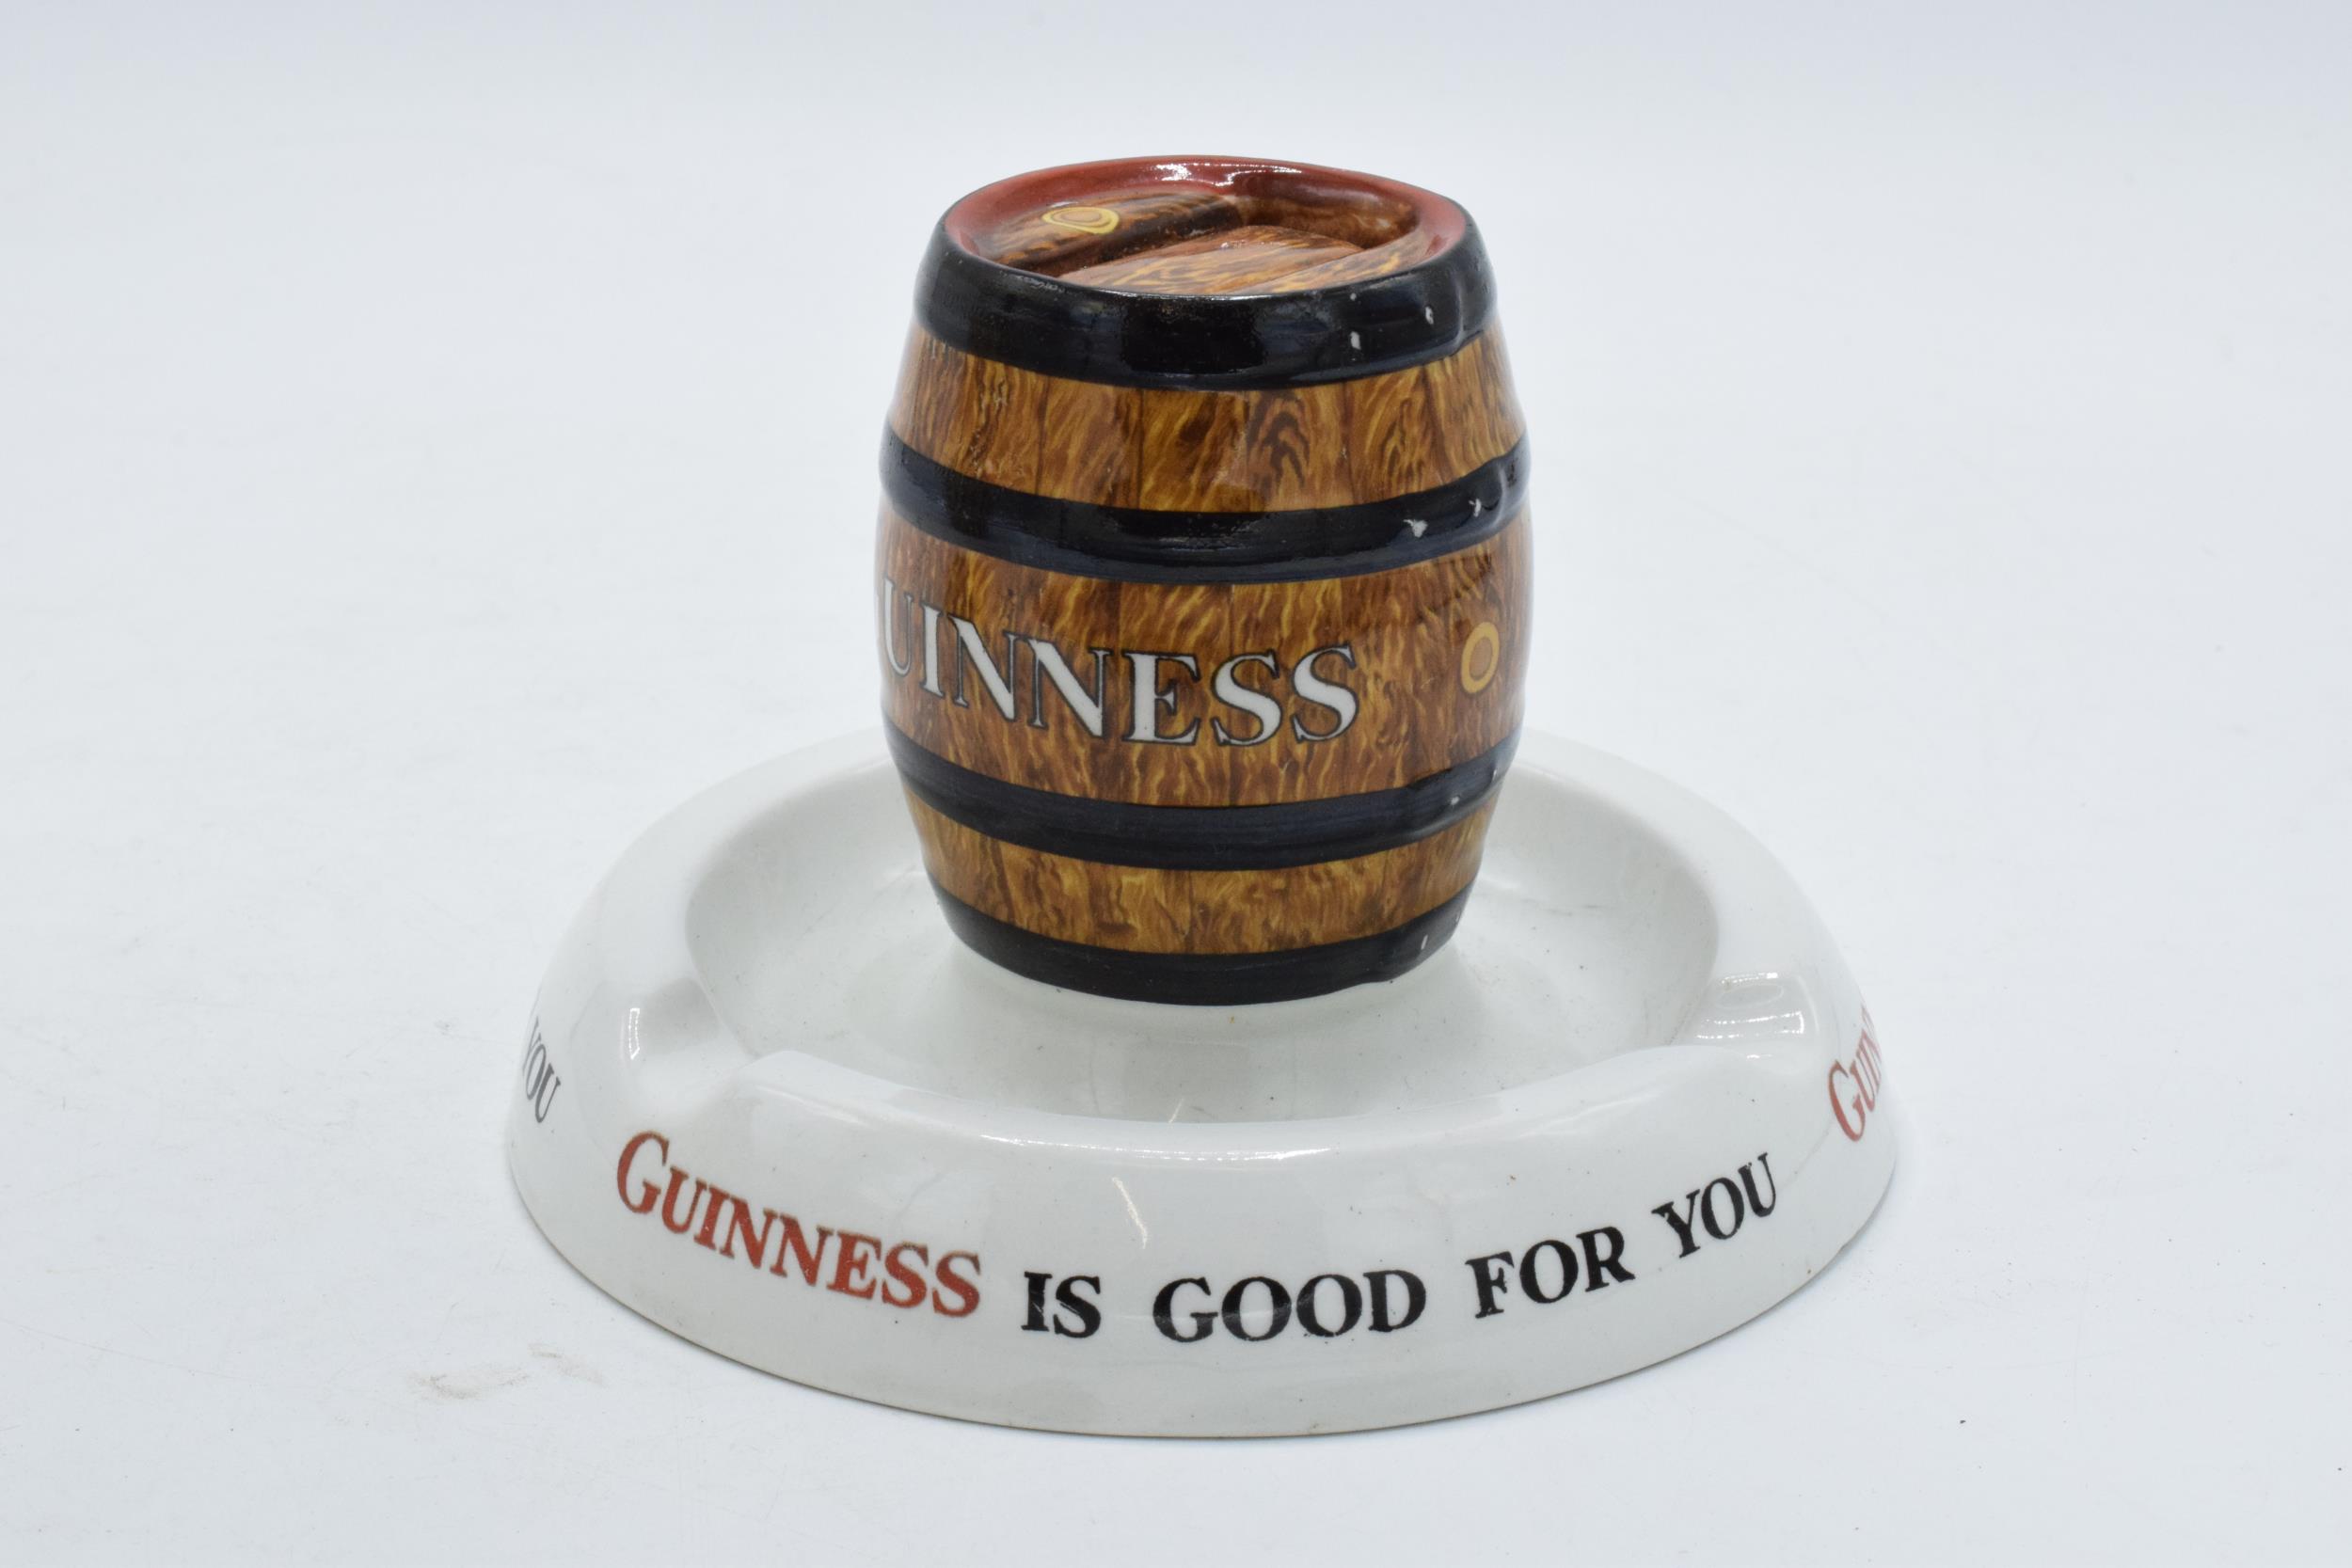 Mintons Guinness advertising ashtray and match striker. In good condition, loss of paint all over in